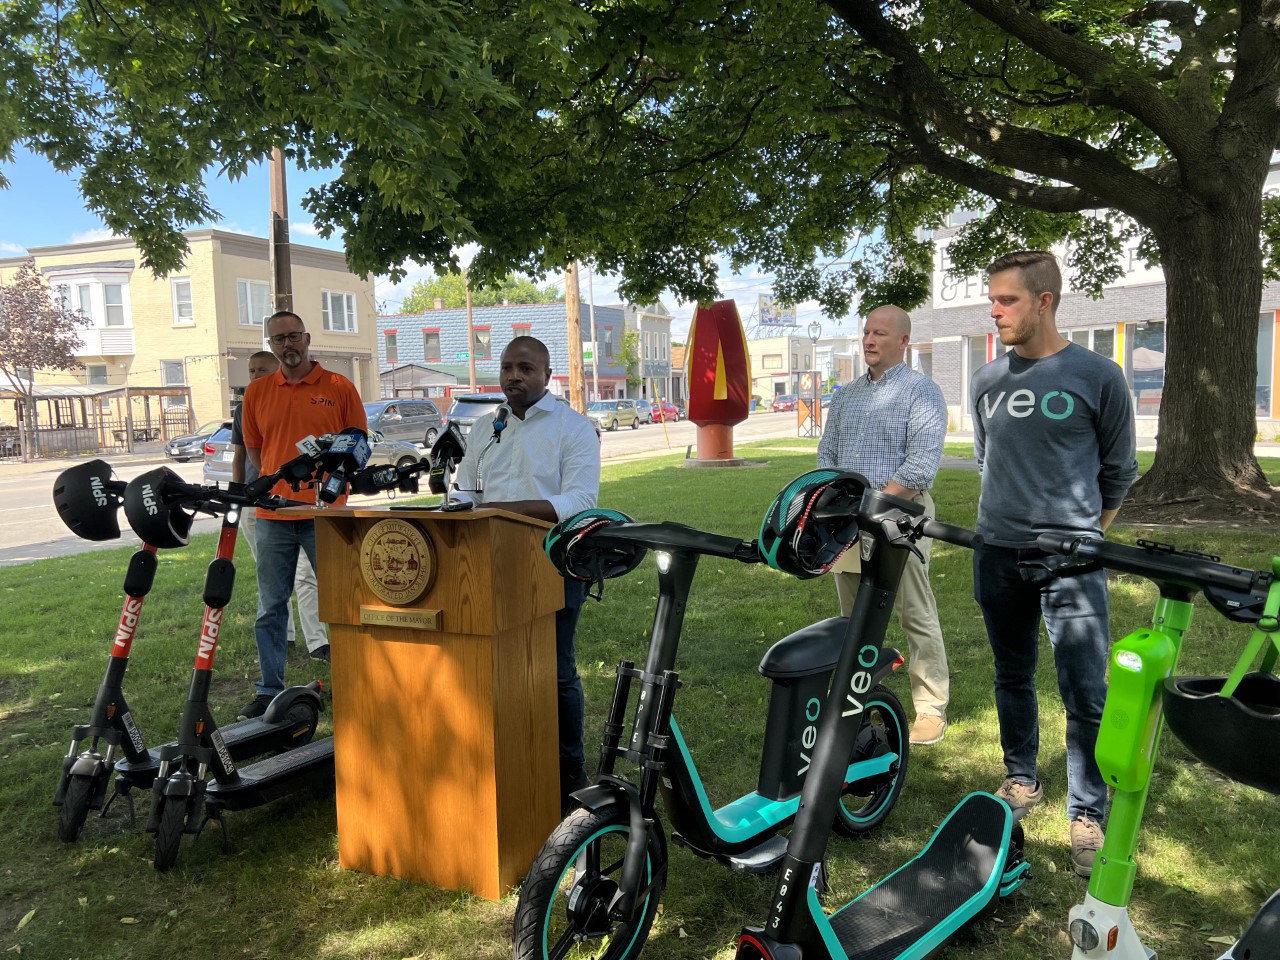 Electric scooters return to the streets of Milwaukee, this time until the end of 2023